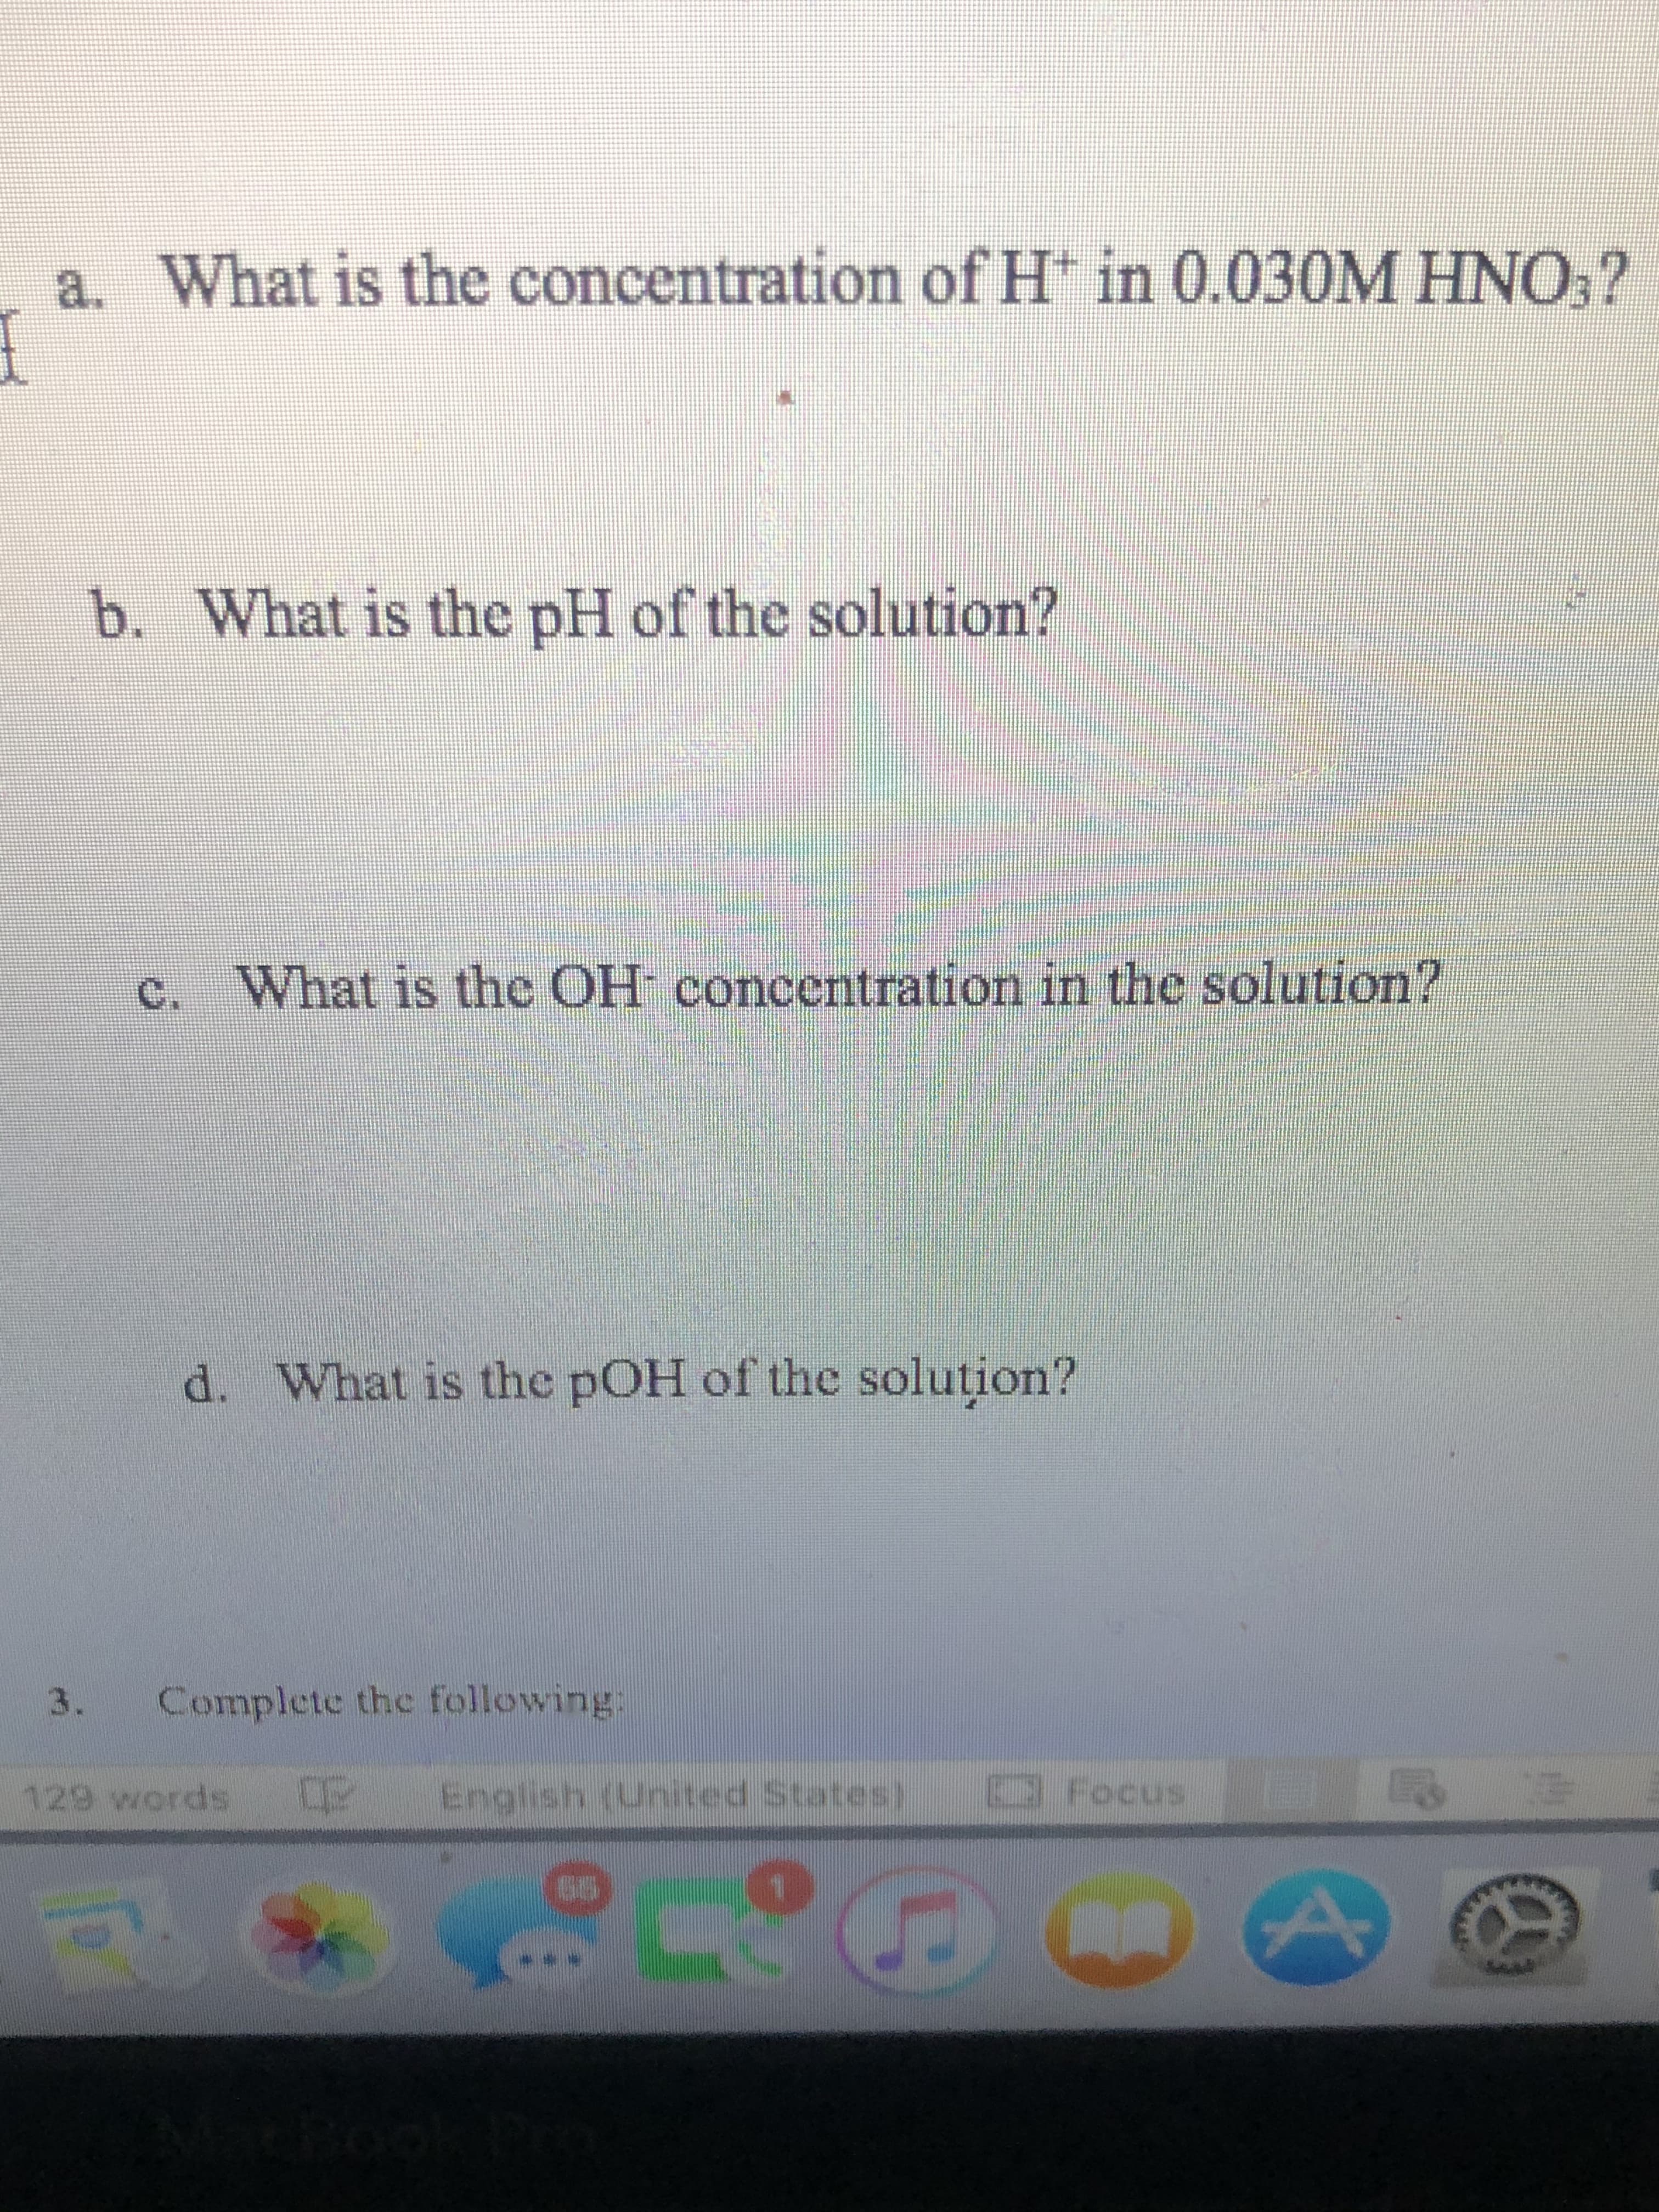 a. What is the concentration of H* in 0.030M HNO,?
b. What is the pH of the solution?
c. What is the OH concentration in the solution?
d. What is the pOH of the soluțion?
3.
Complete the following:
129 words
English (United States)
Focus
